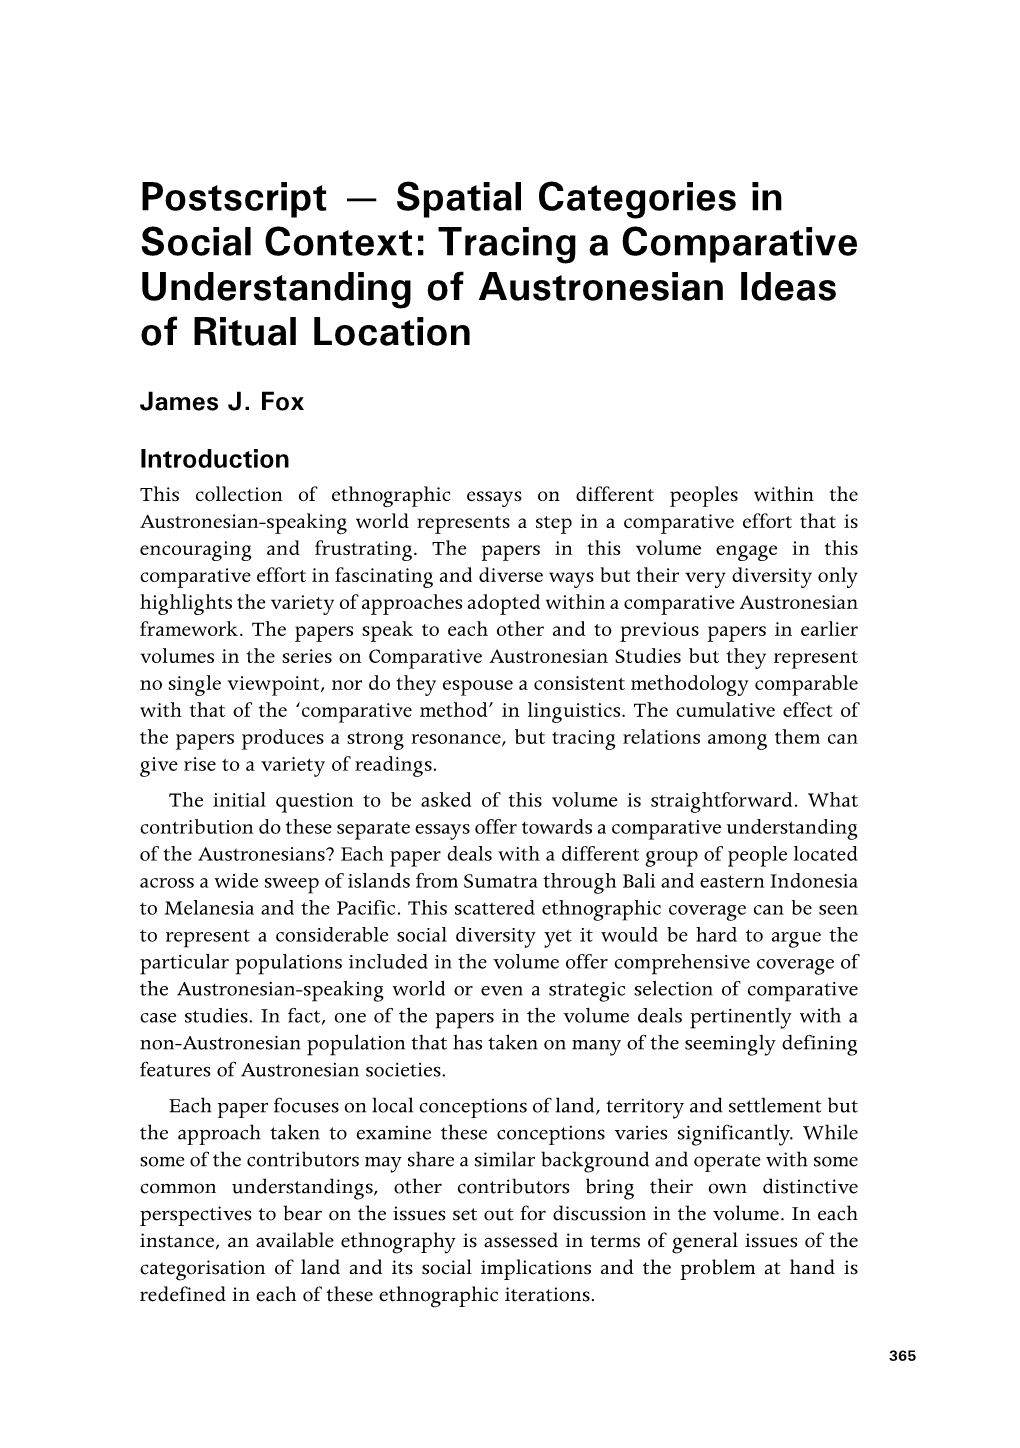 Spatial Categories in Social Context: Tracing a Comparative Understanding of Austronesian Ideas of Ritual Location